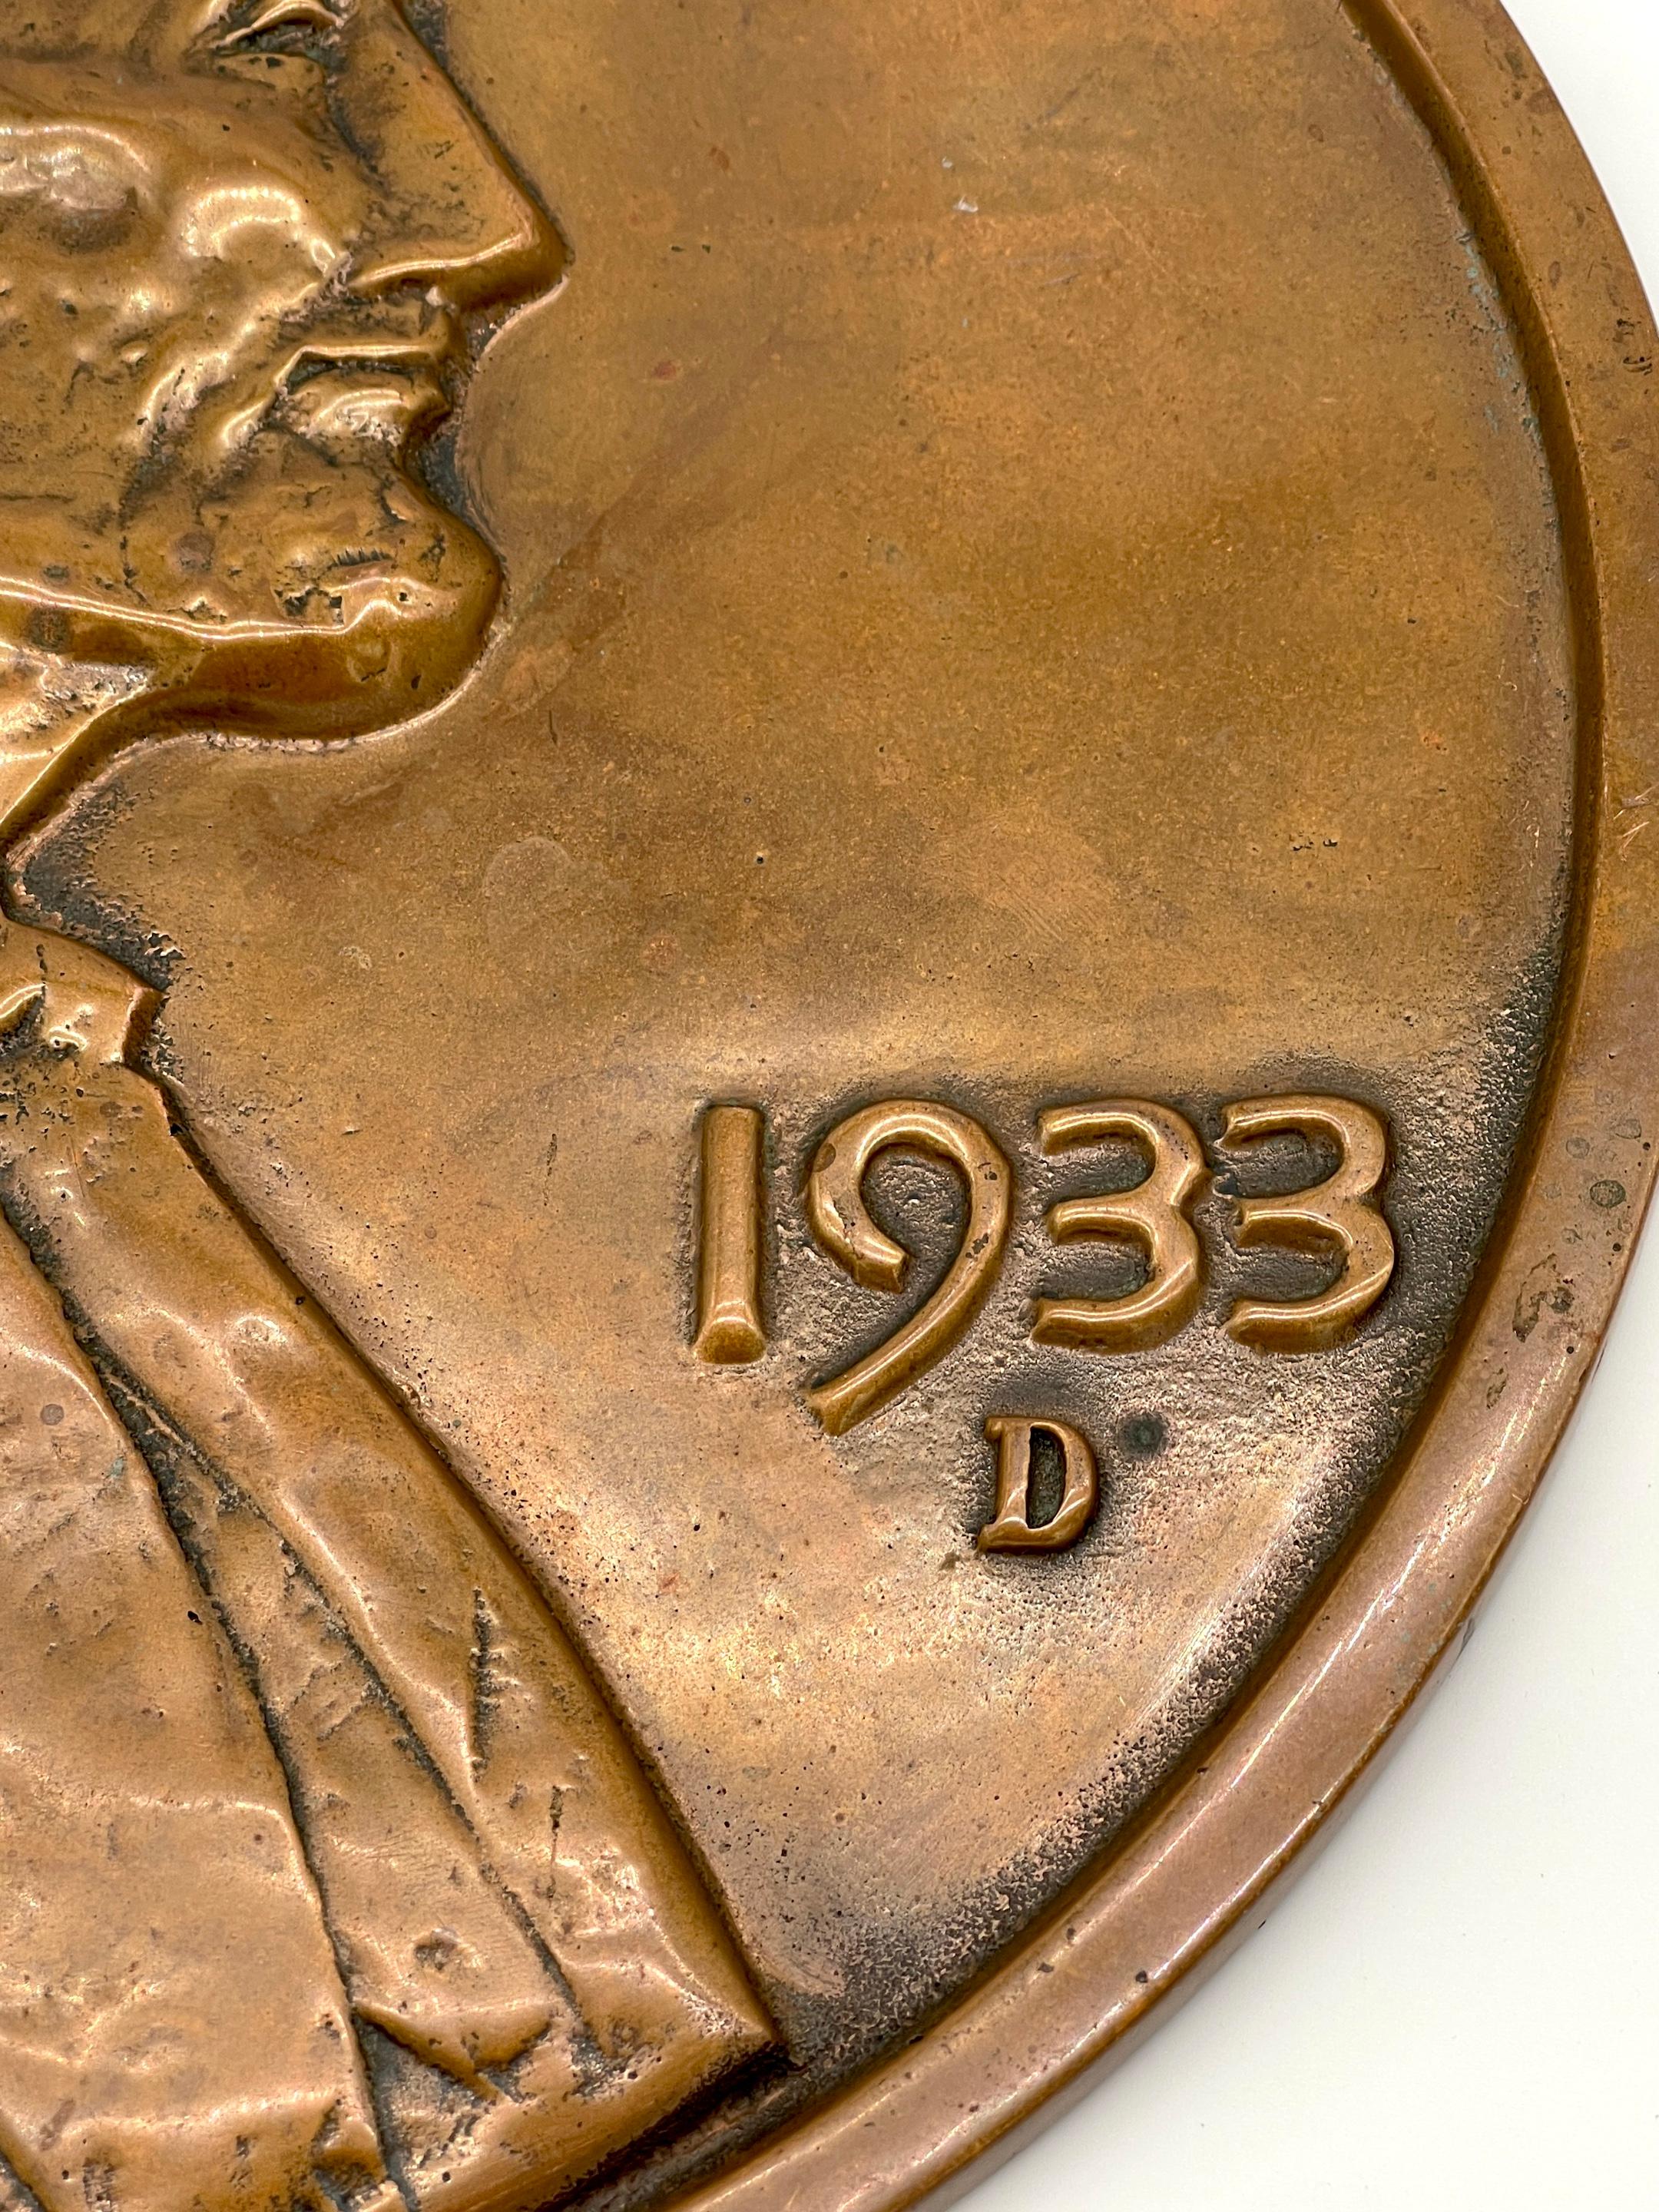 American Maquette/Sculpture of Victor David Brenner's 1933 D Lincoln Penny Front/ Obverse For Sale